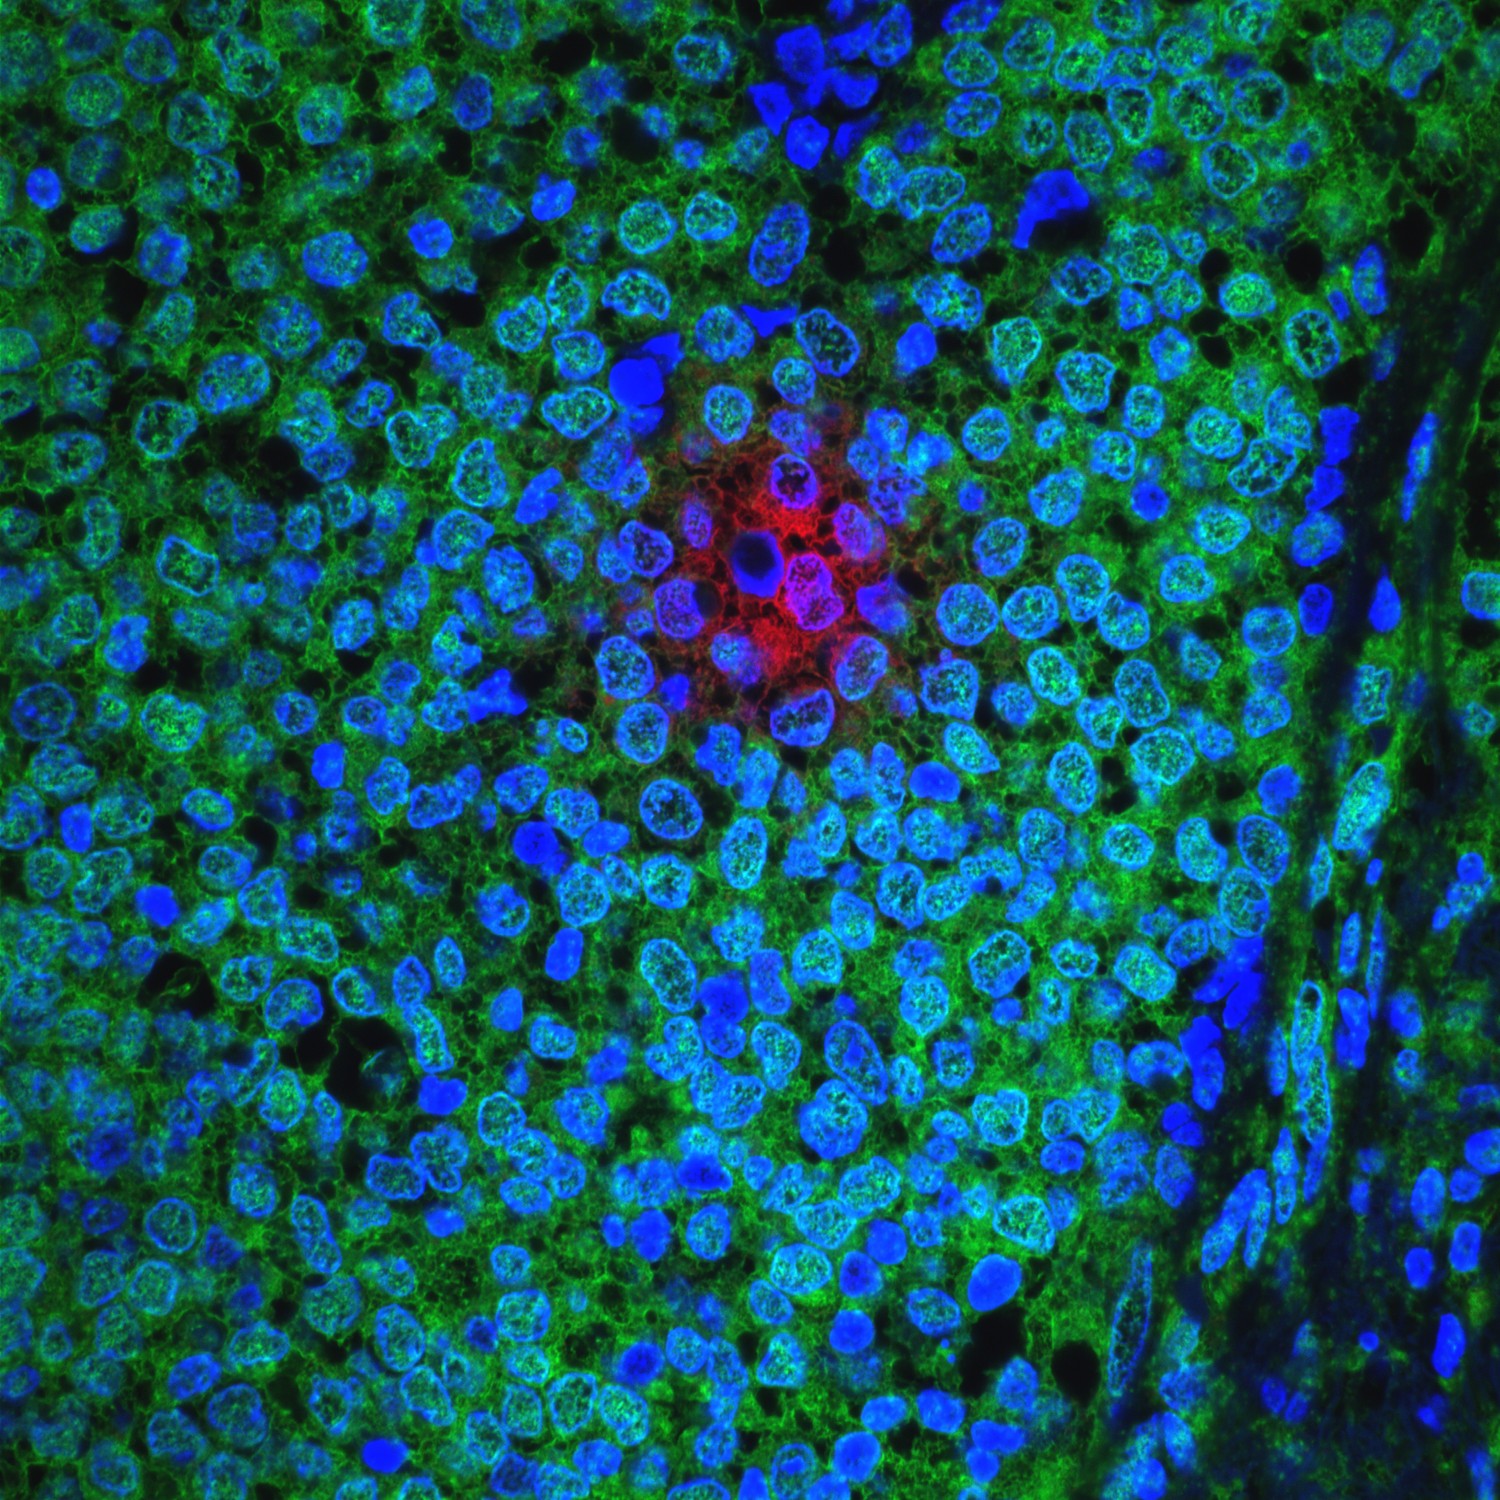 cluster of slow-cycling (AKT-low/Hes1-high) breast cancer cells (red) within a human ER+ primary breast tumor (cell nuclei in blue; rapidly cycling, AKT-high, cancer cells in green)